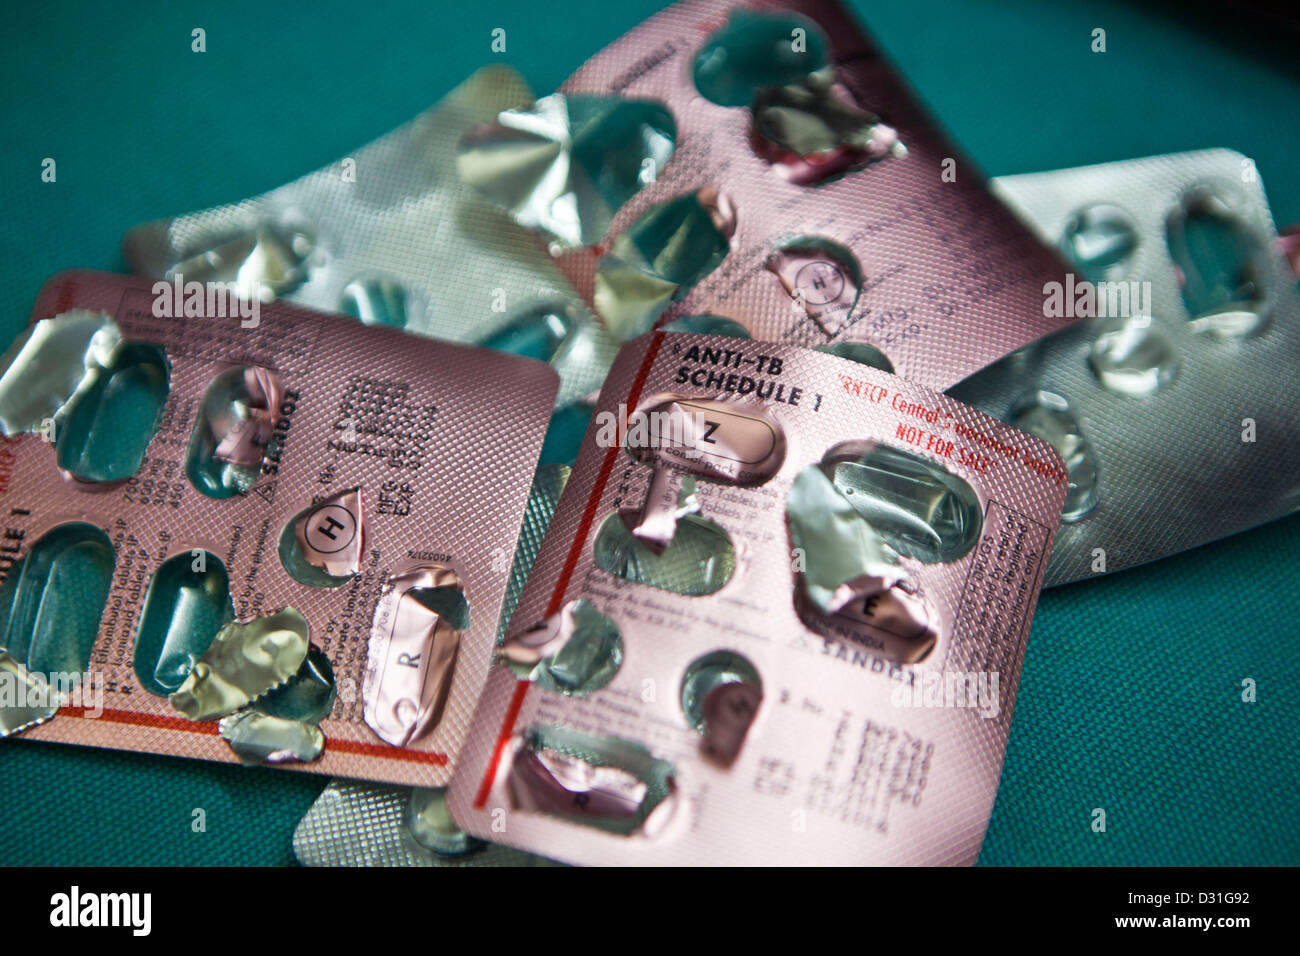 Empty blister-packs of patients Tuberculosis (TB) daily medication in a health clinic in Delhi, India. Stock Photo